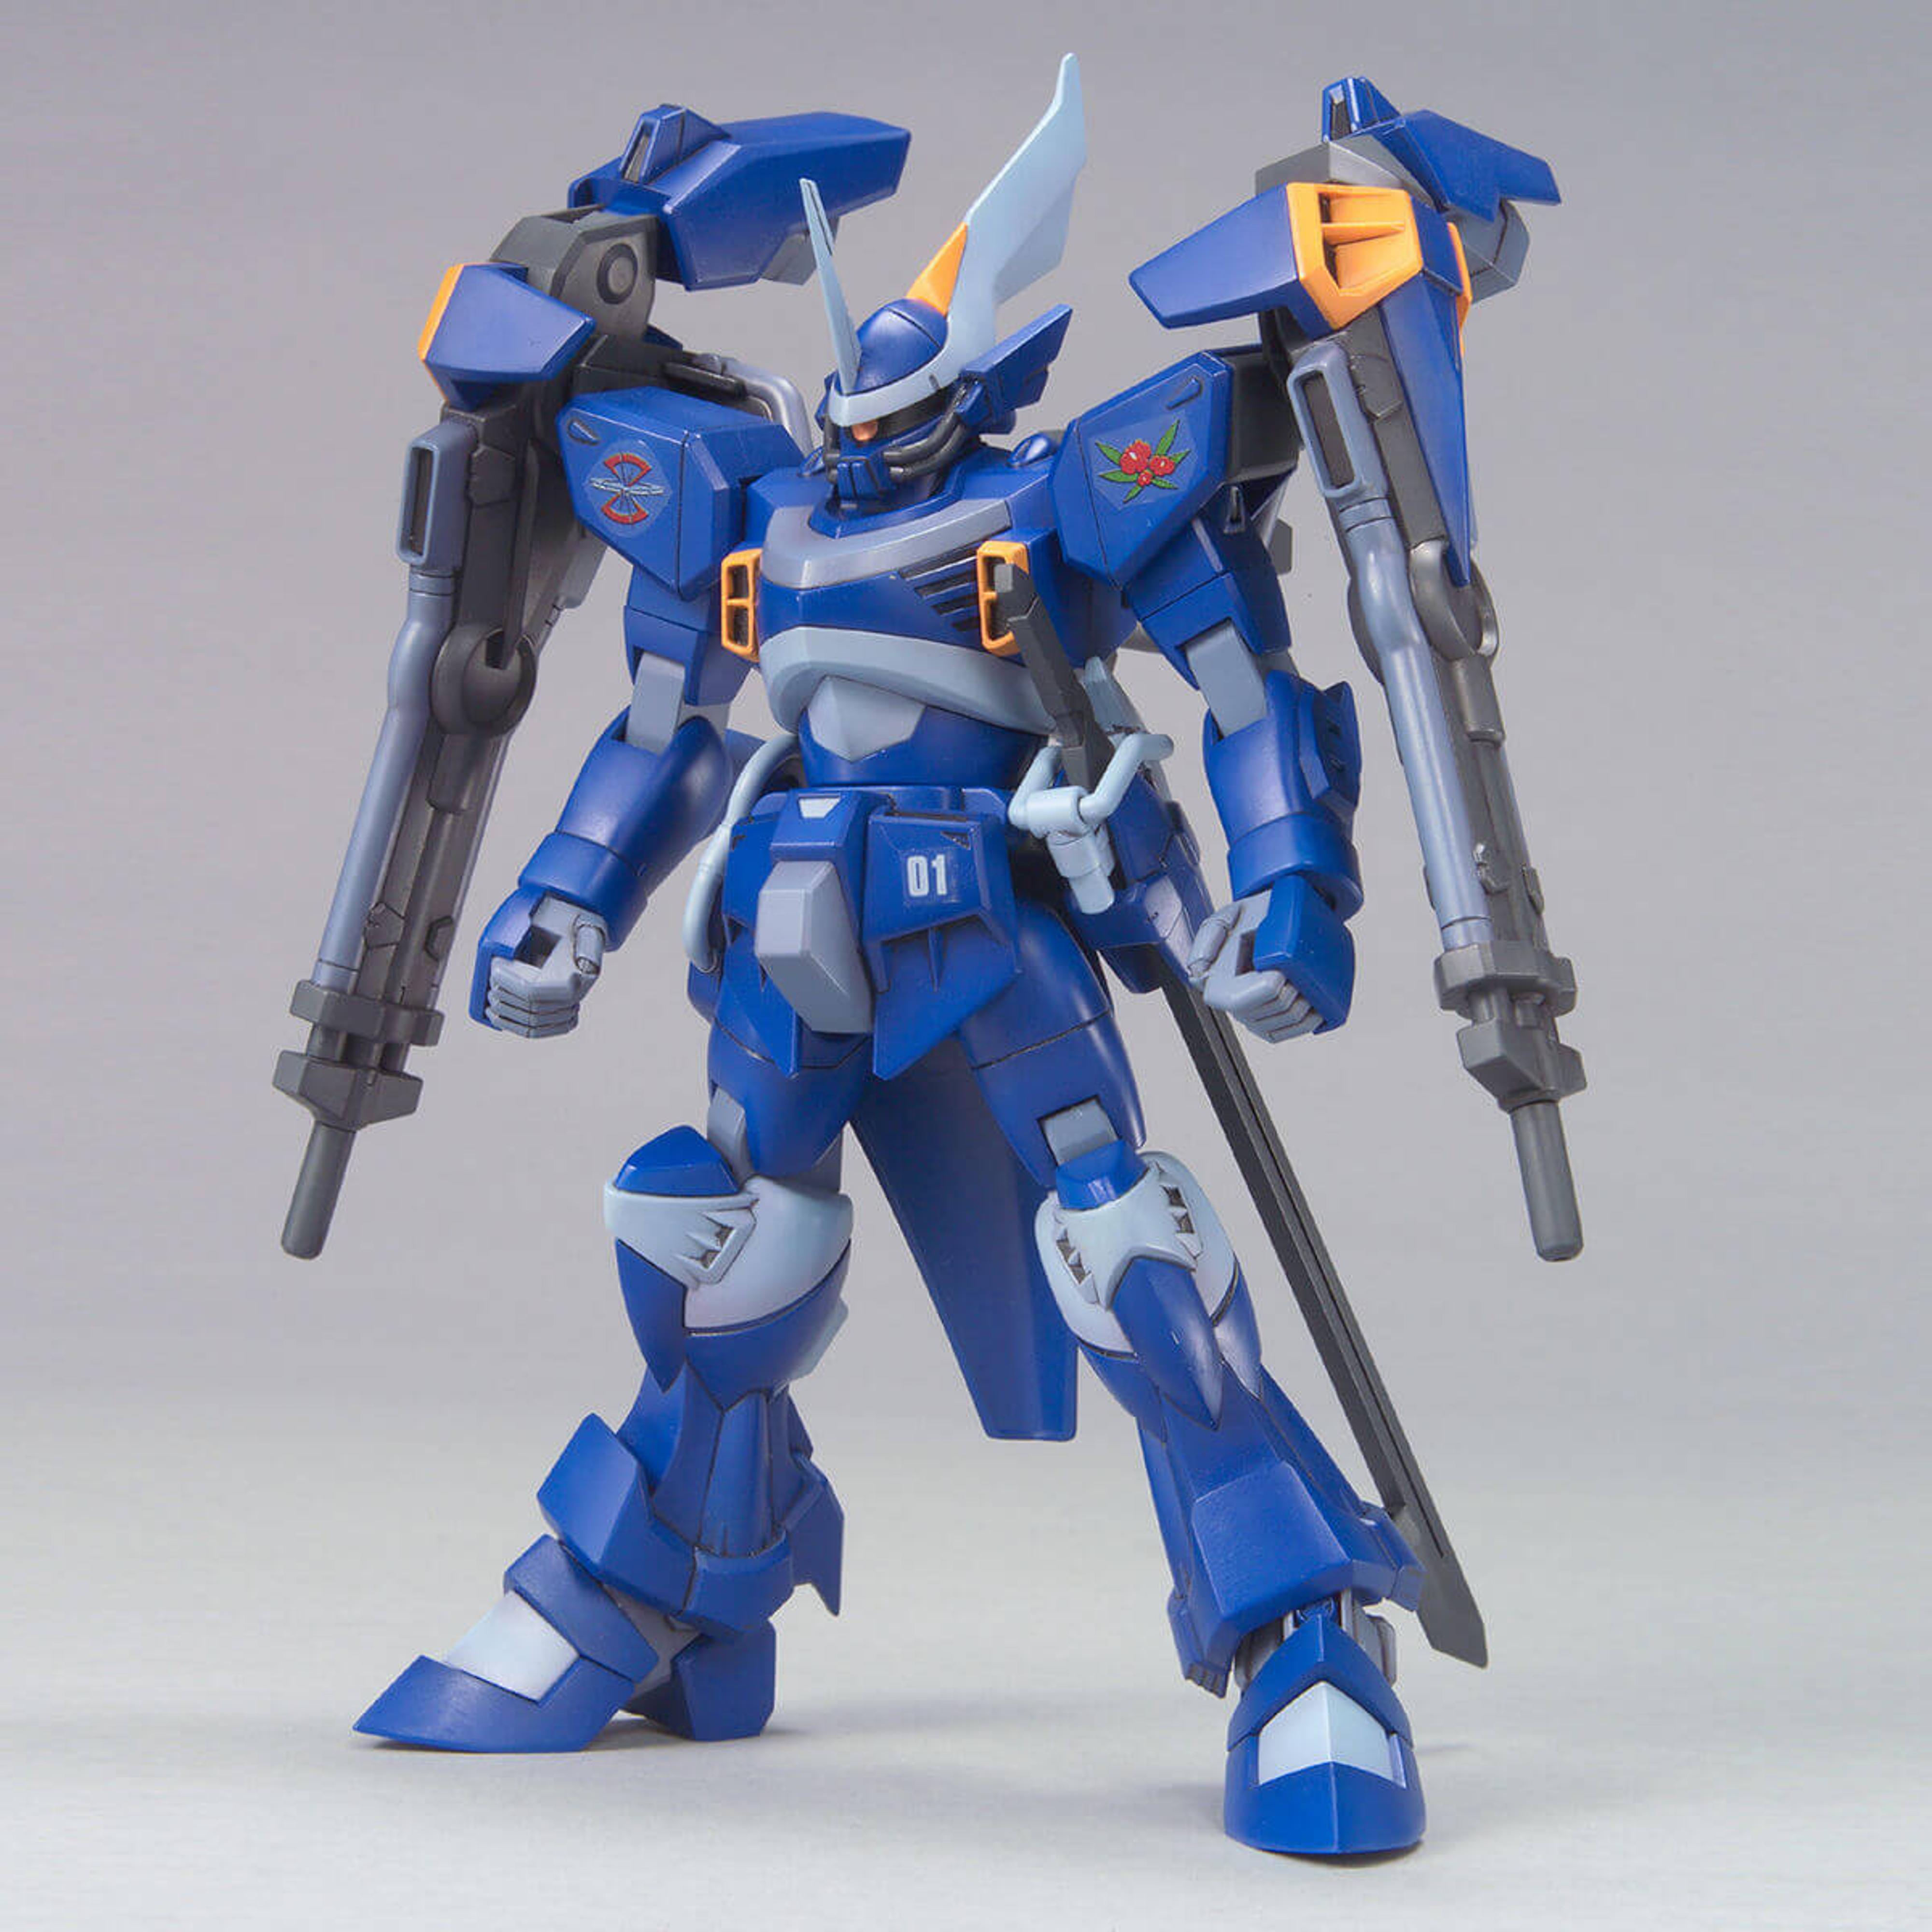 1/144 HG MSG:SEED MSV CGUE Type D.E.E.P.ARMS